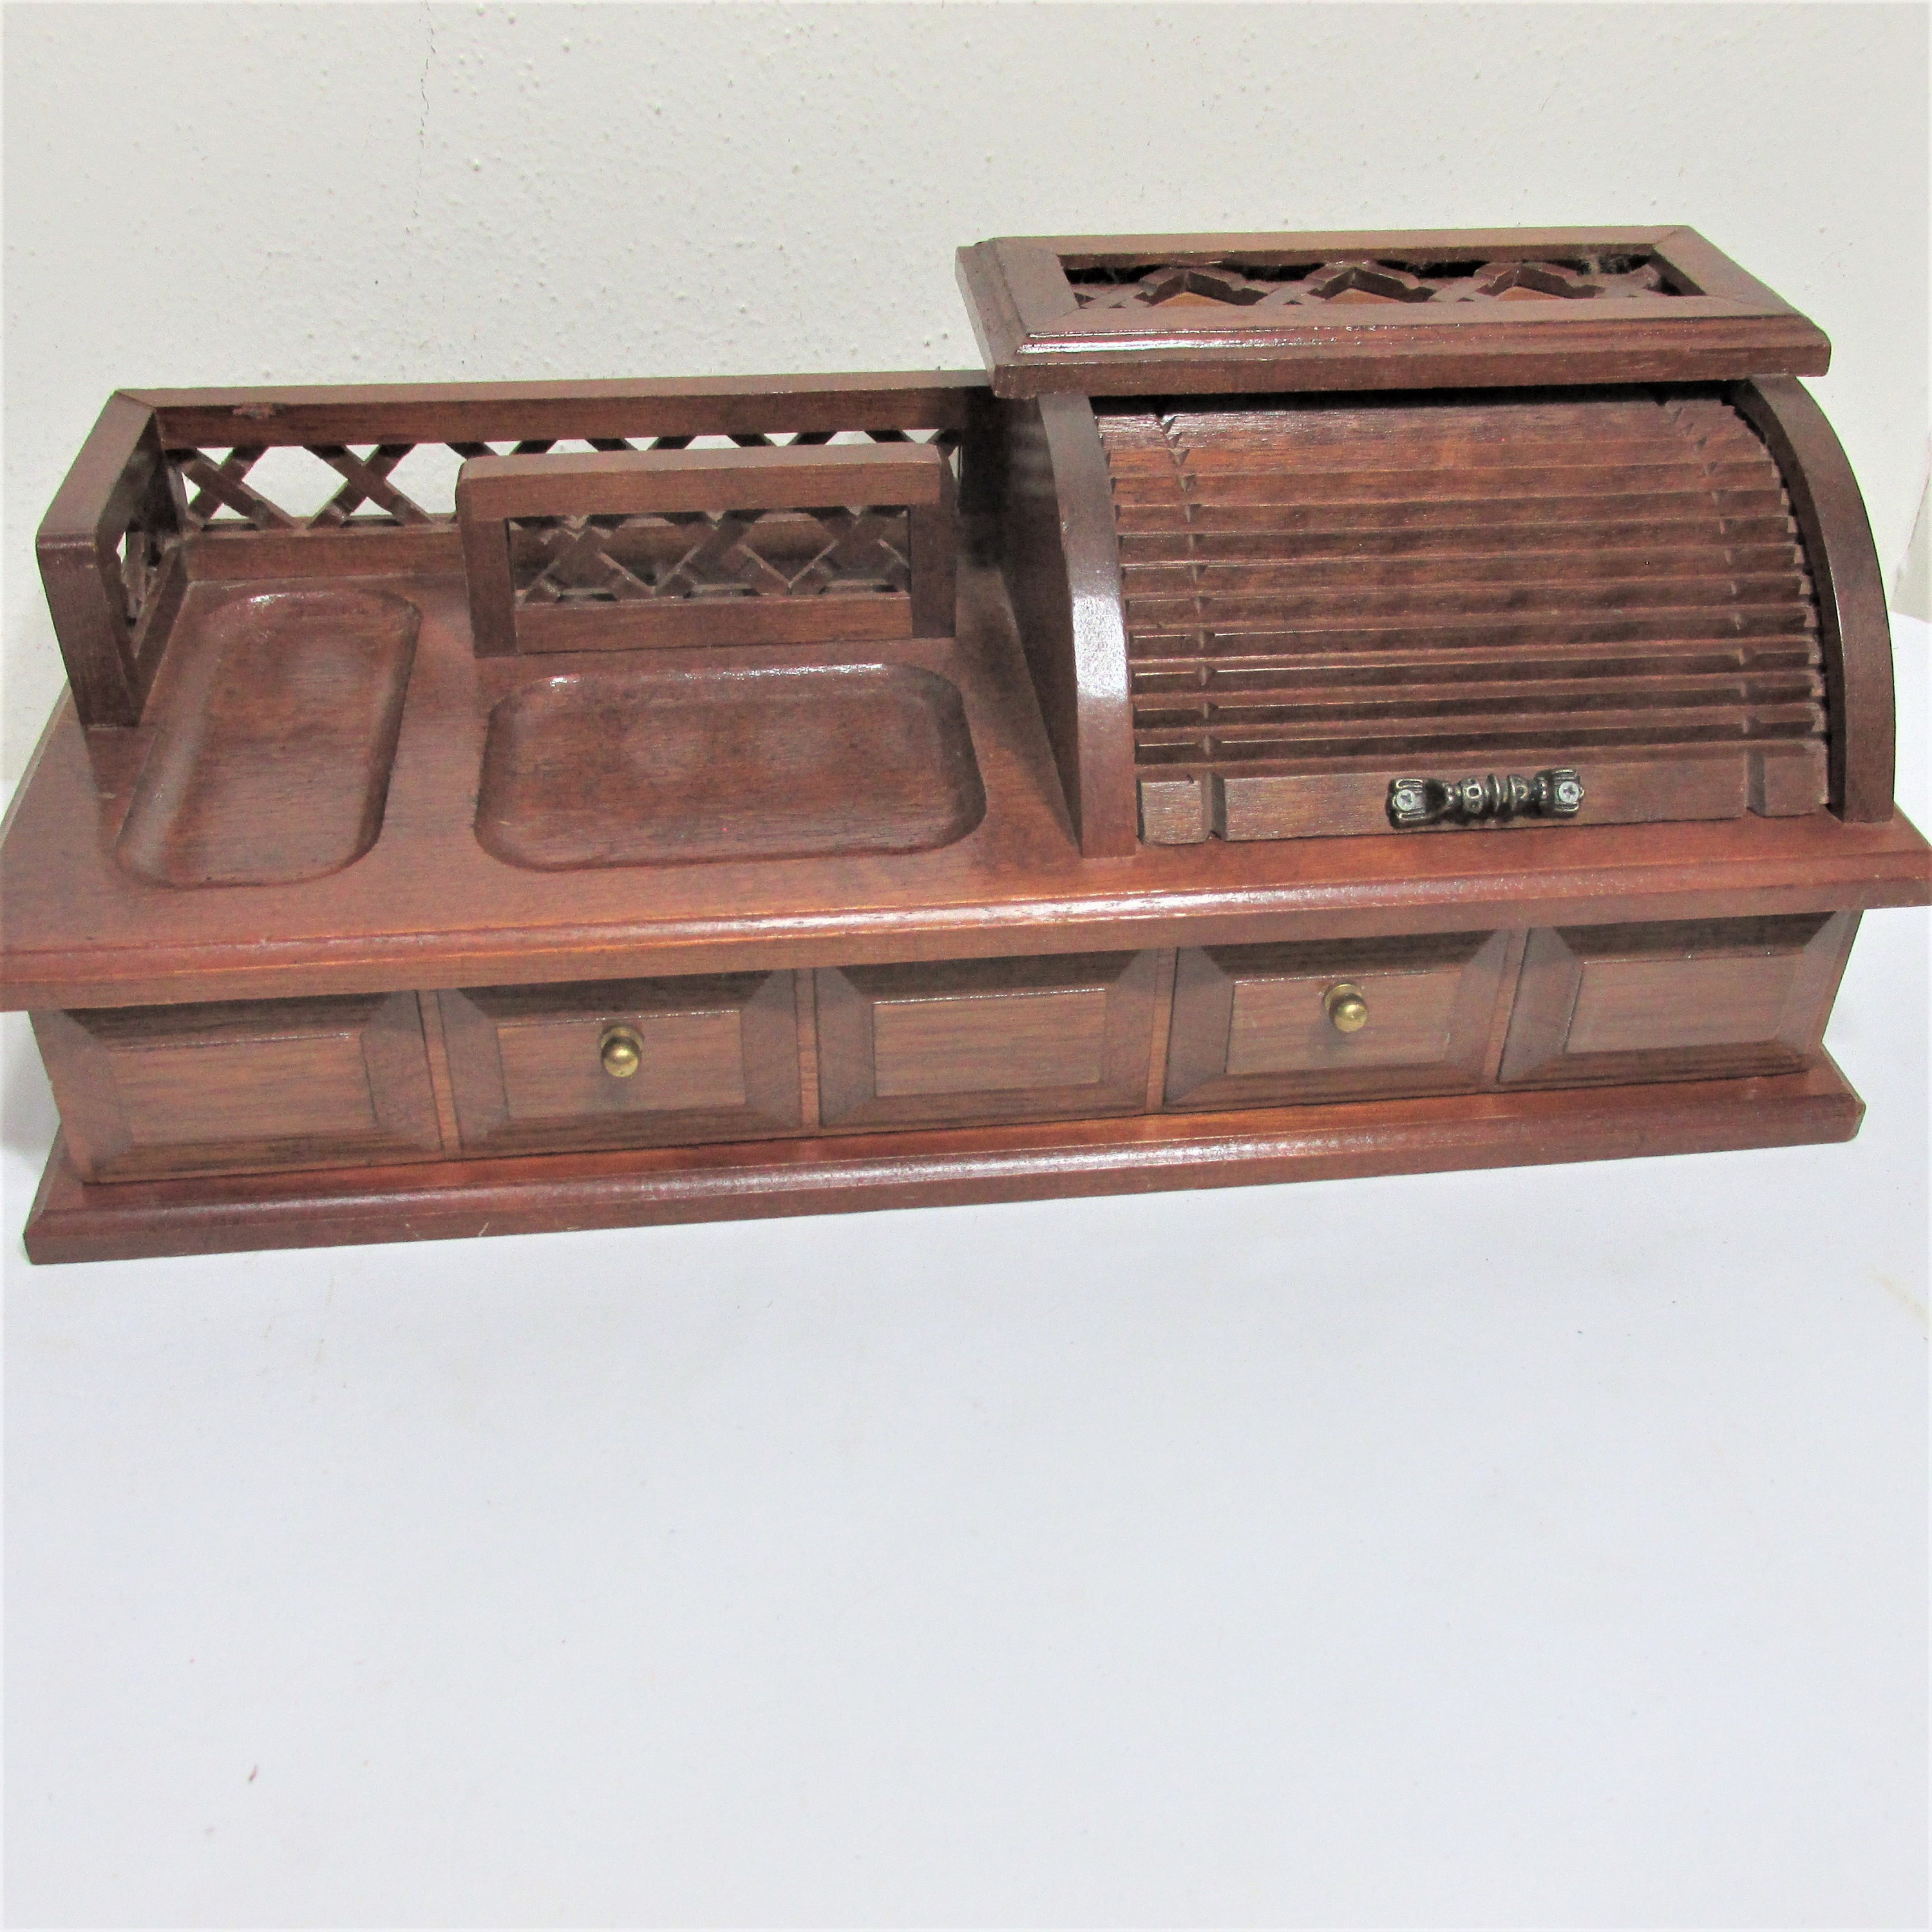 Sleek, Rich Mahogany Colored Dresser Top Valet with Watch Storage and Ring  Rolls